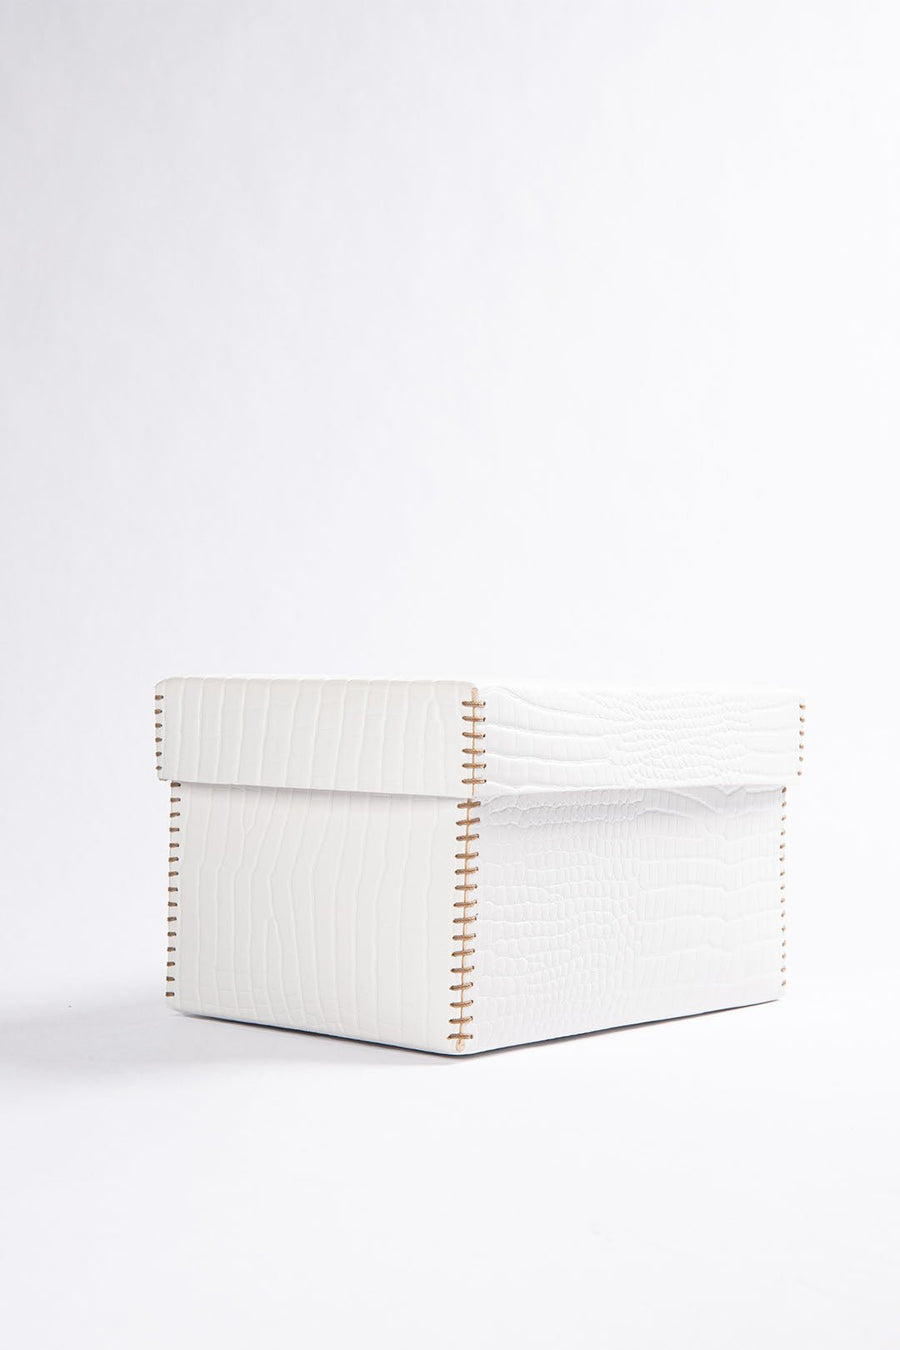 HENRY BEGUELIN LEATHER BOX, WHITE - Burning Torch Online Boutique